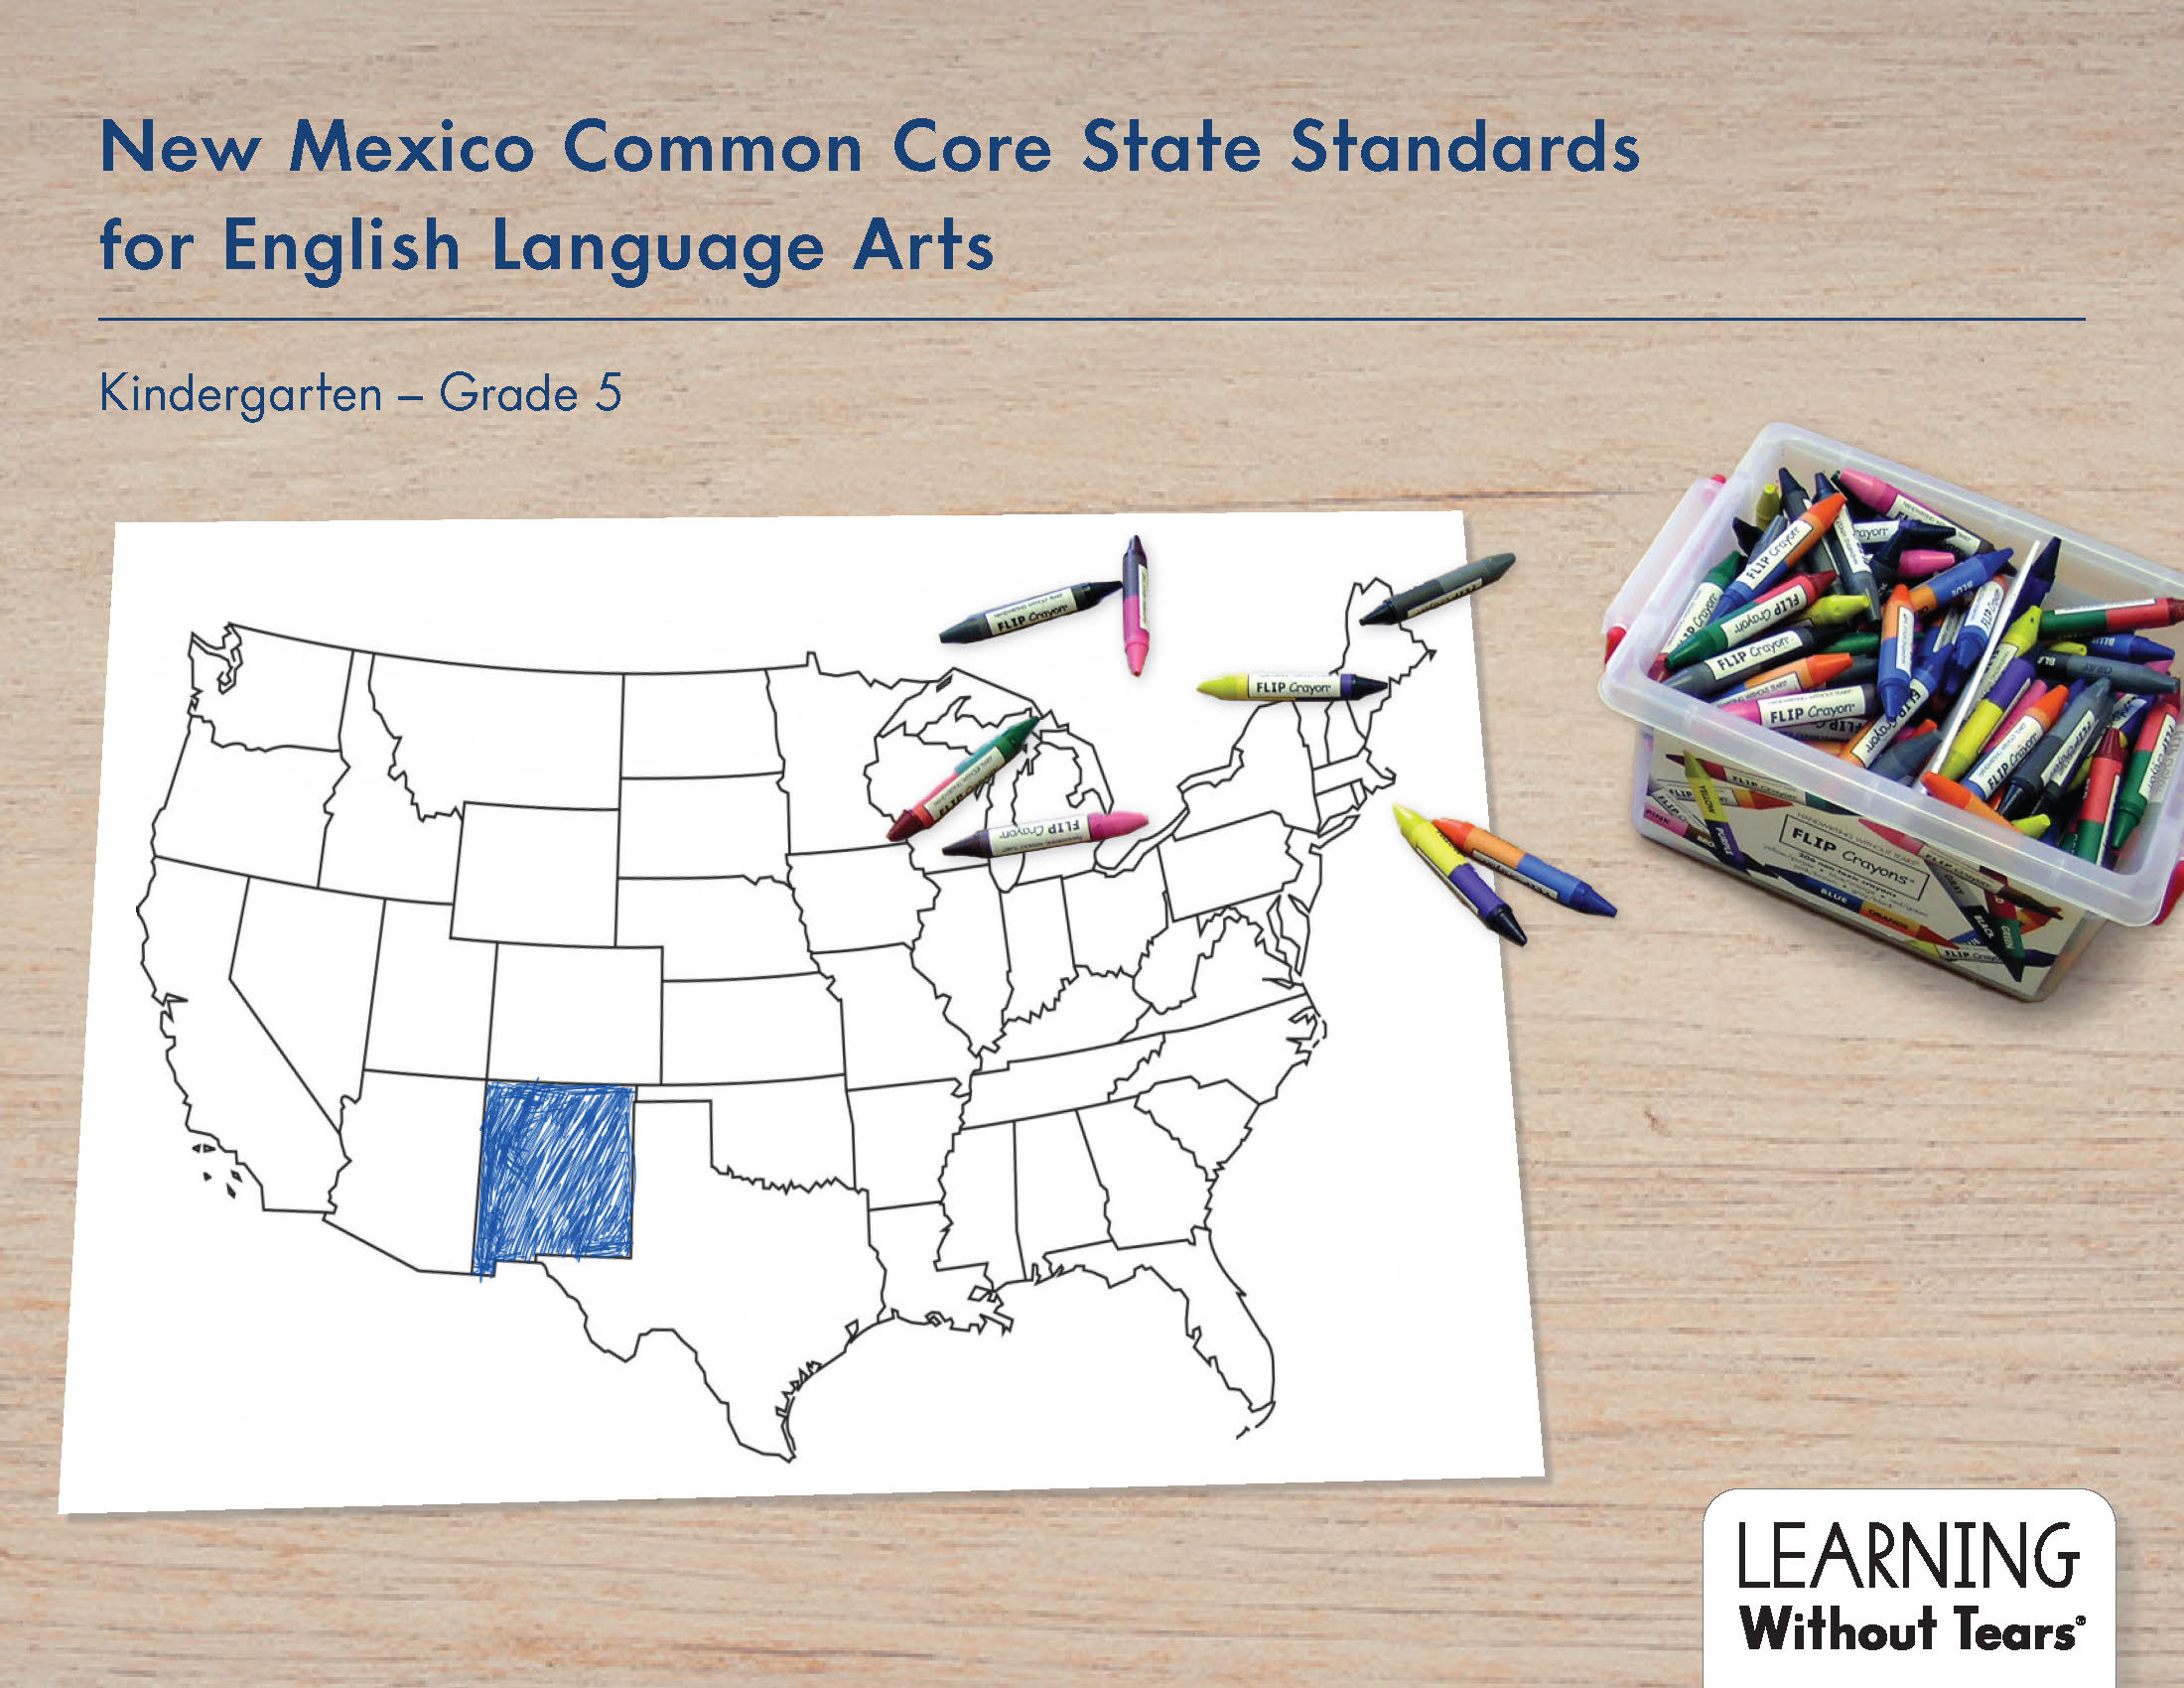 New Mexico Common Core State Standards